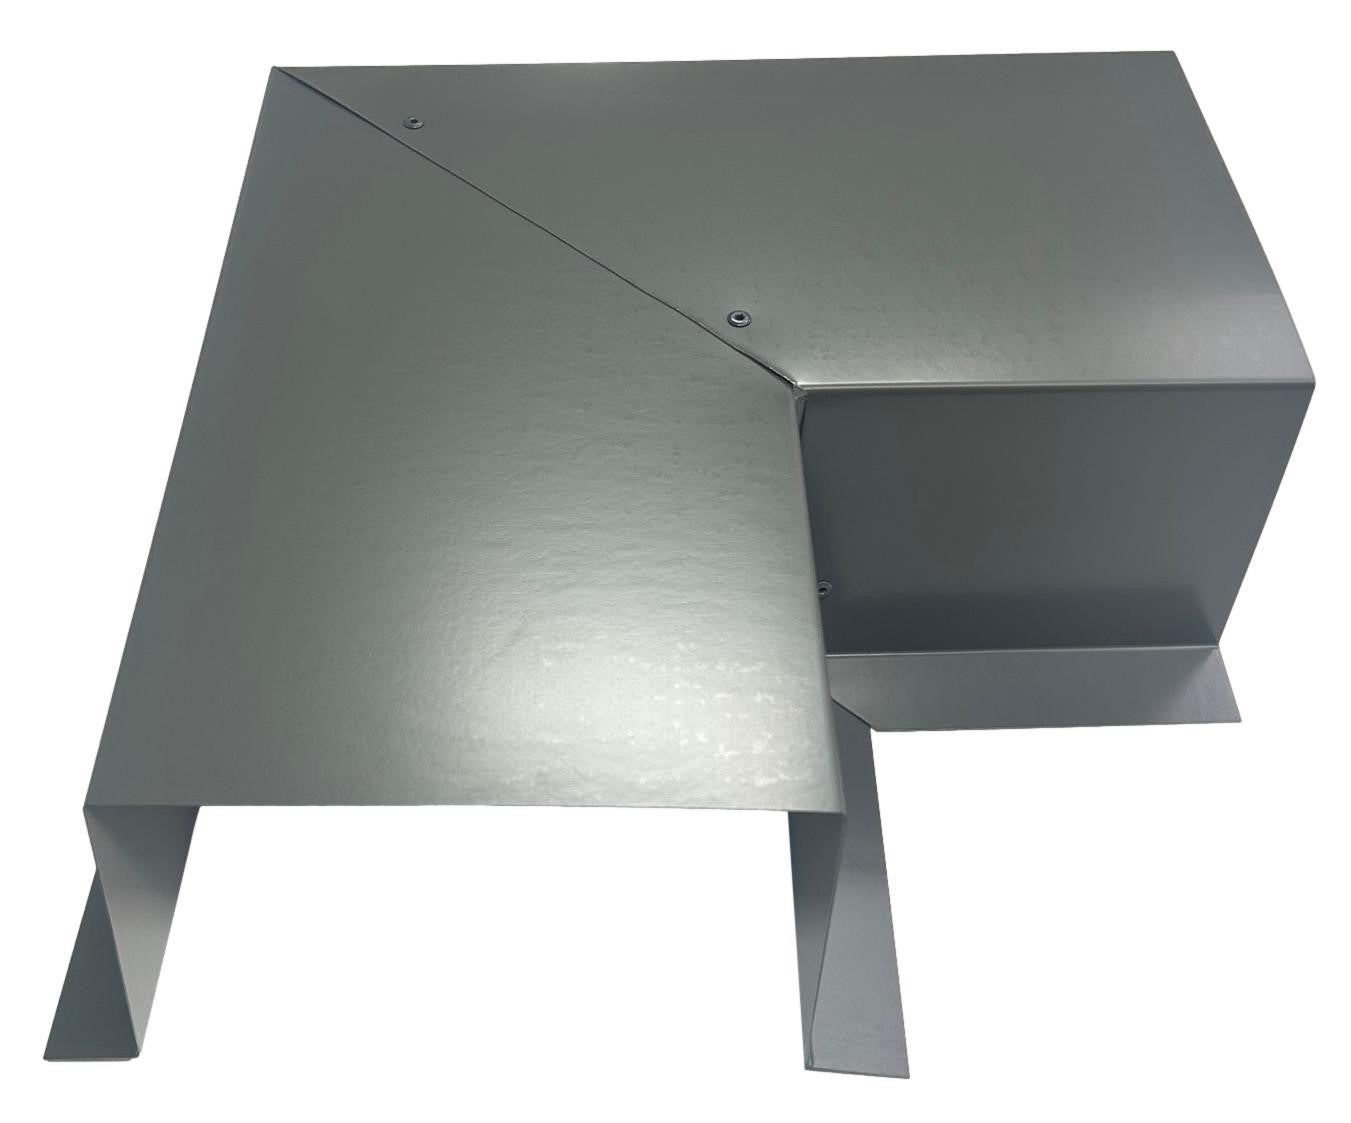 A metallic, angular object with a geometric design featuring sharp edges and flat surfaces. It has a reflective, smooth finish and appears to be part of a mechanical or industrial assembly. The object includes Perma Cover Residential Series - Line Set Cover Side Turning Elbows - Premium Quality, screws, and a folded structure for easy installation.